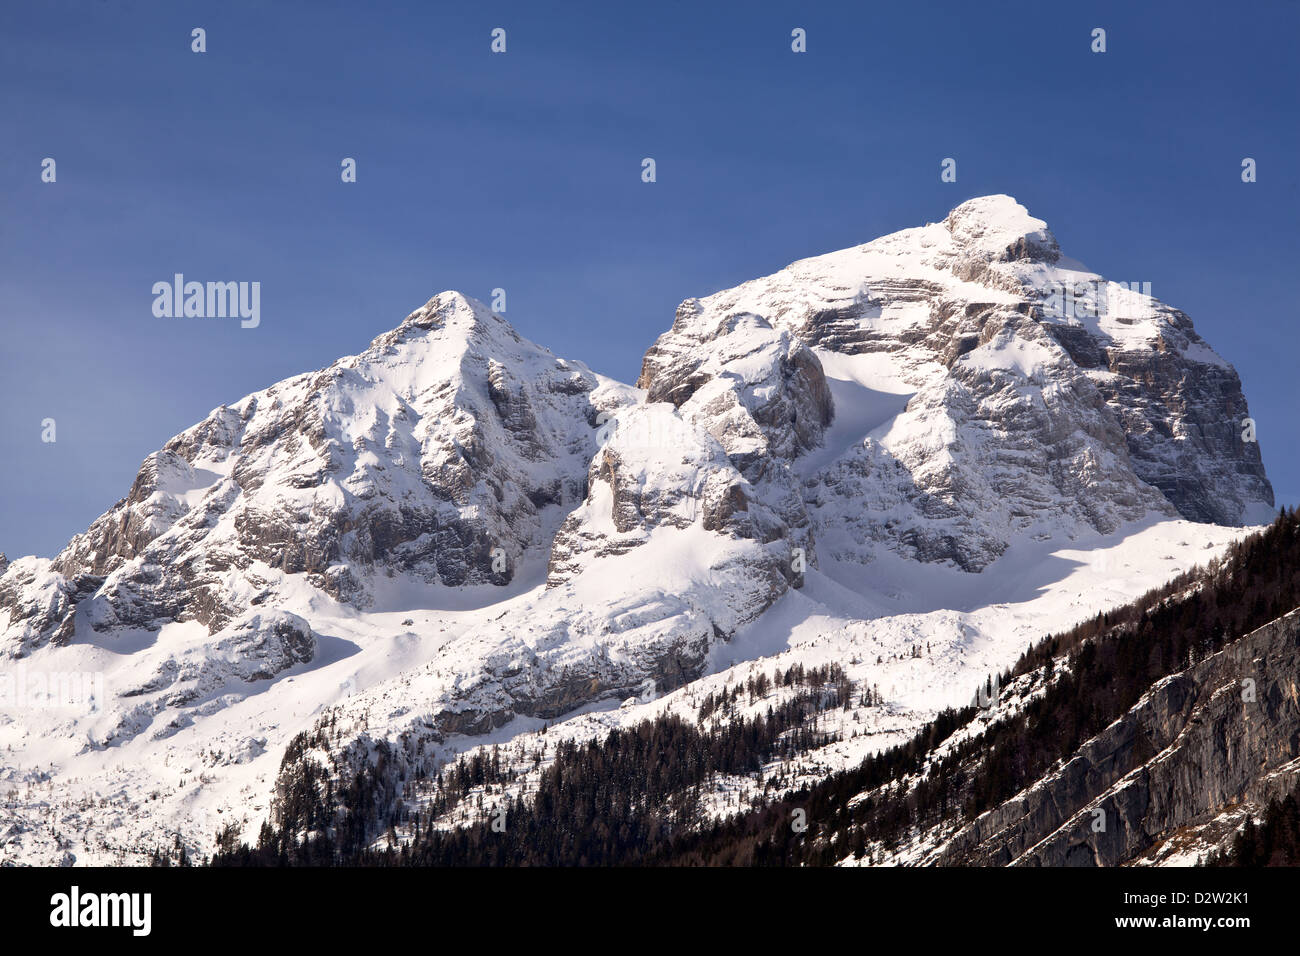 Mountain Jalovec in winter conditions with plenty of snow. Jalovec is a mountain in the Julian Alps with an elevation of 2,645 m. Stock Photo